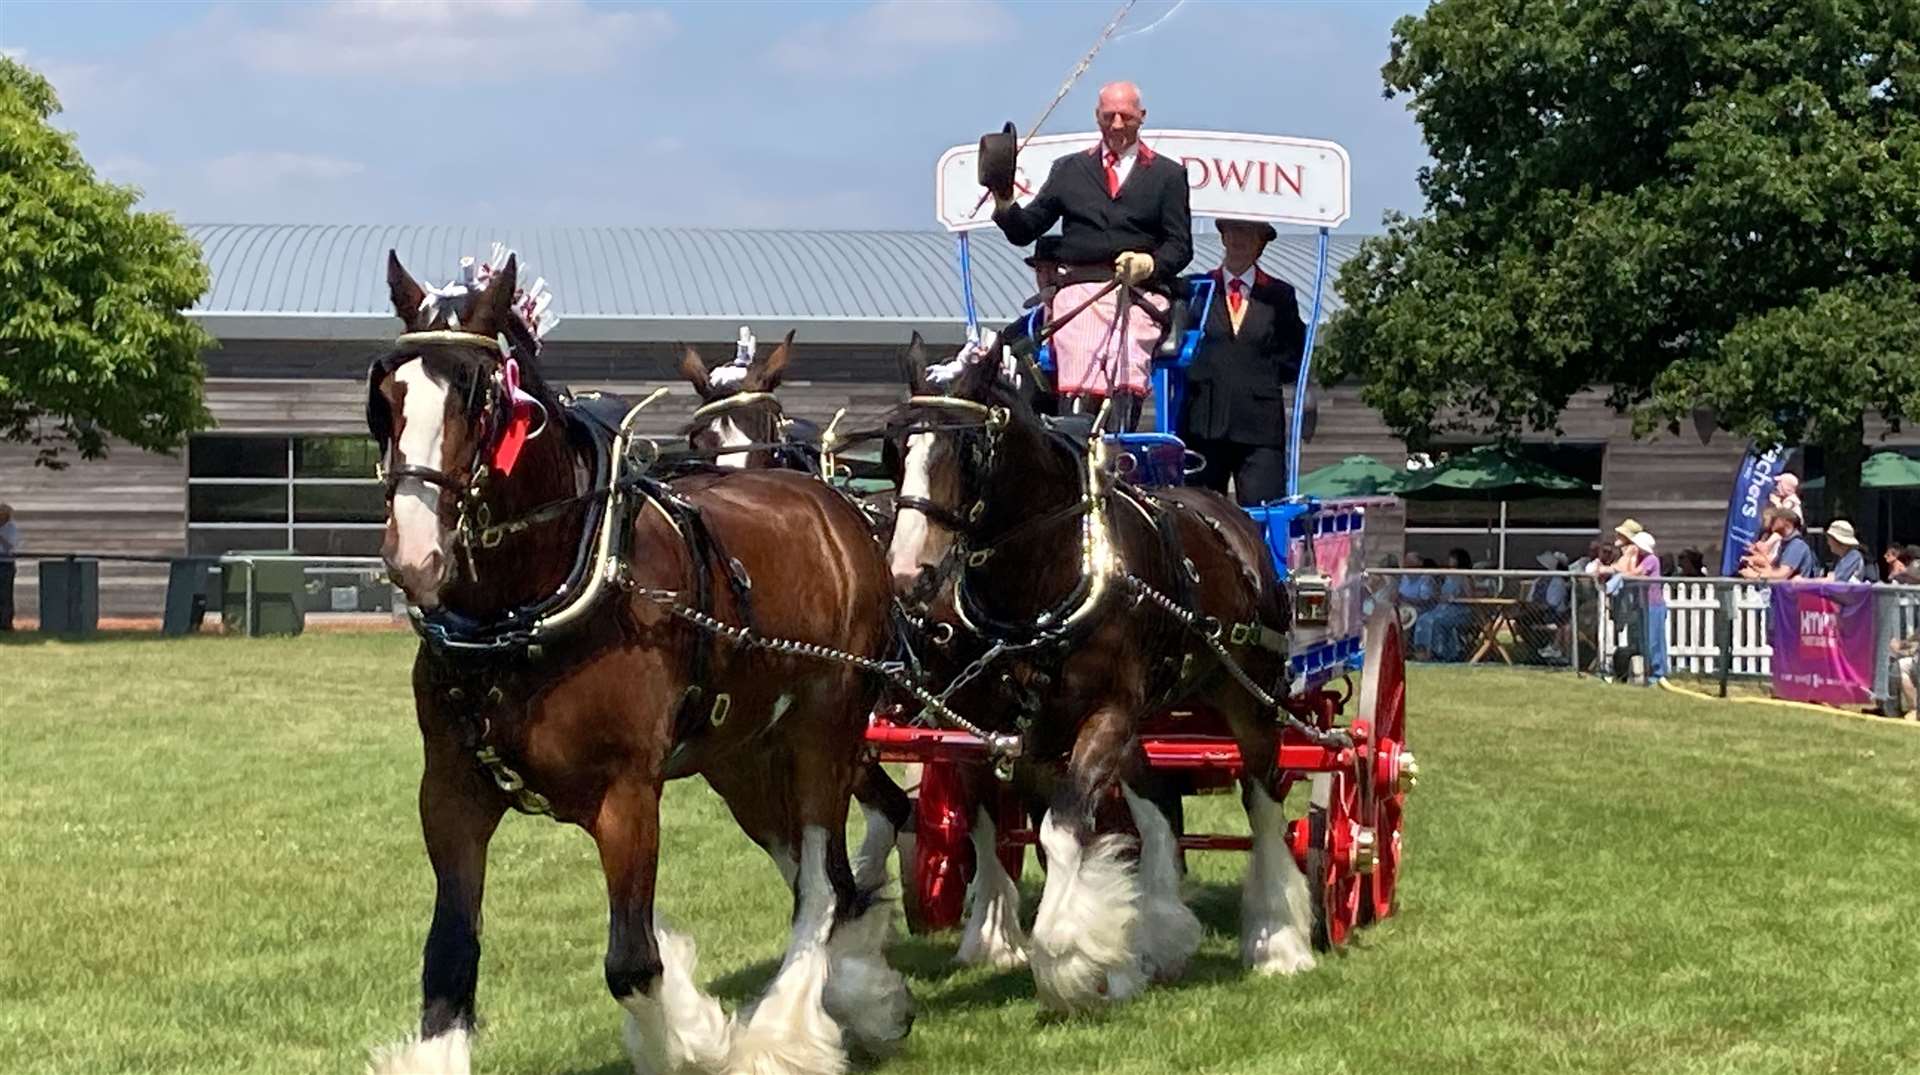 John and Jayne Goodwin, from Sheppey, with their shire horses